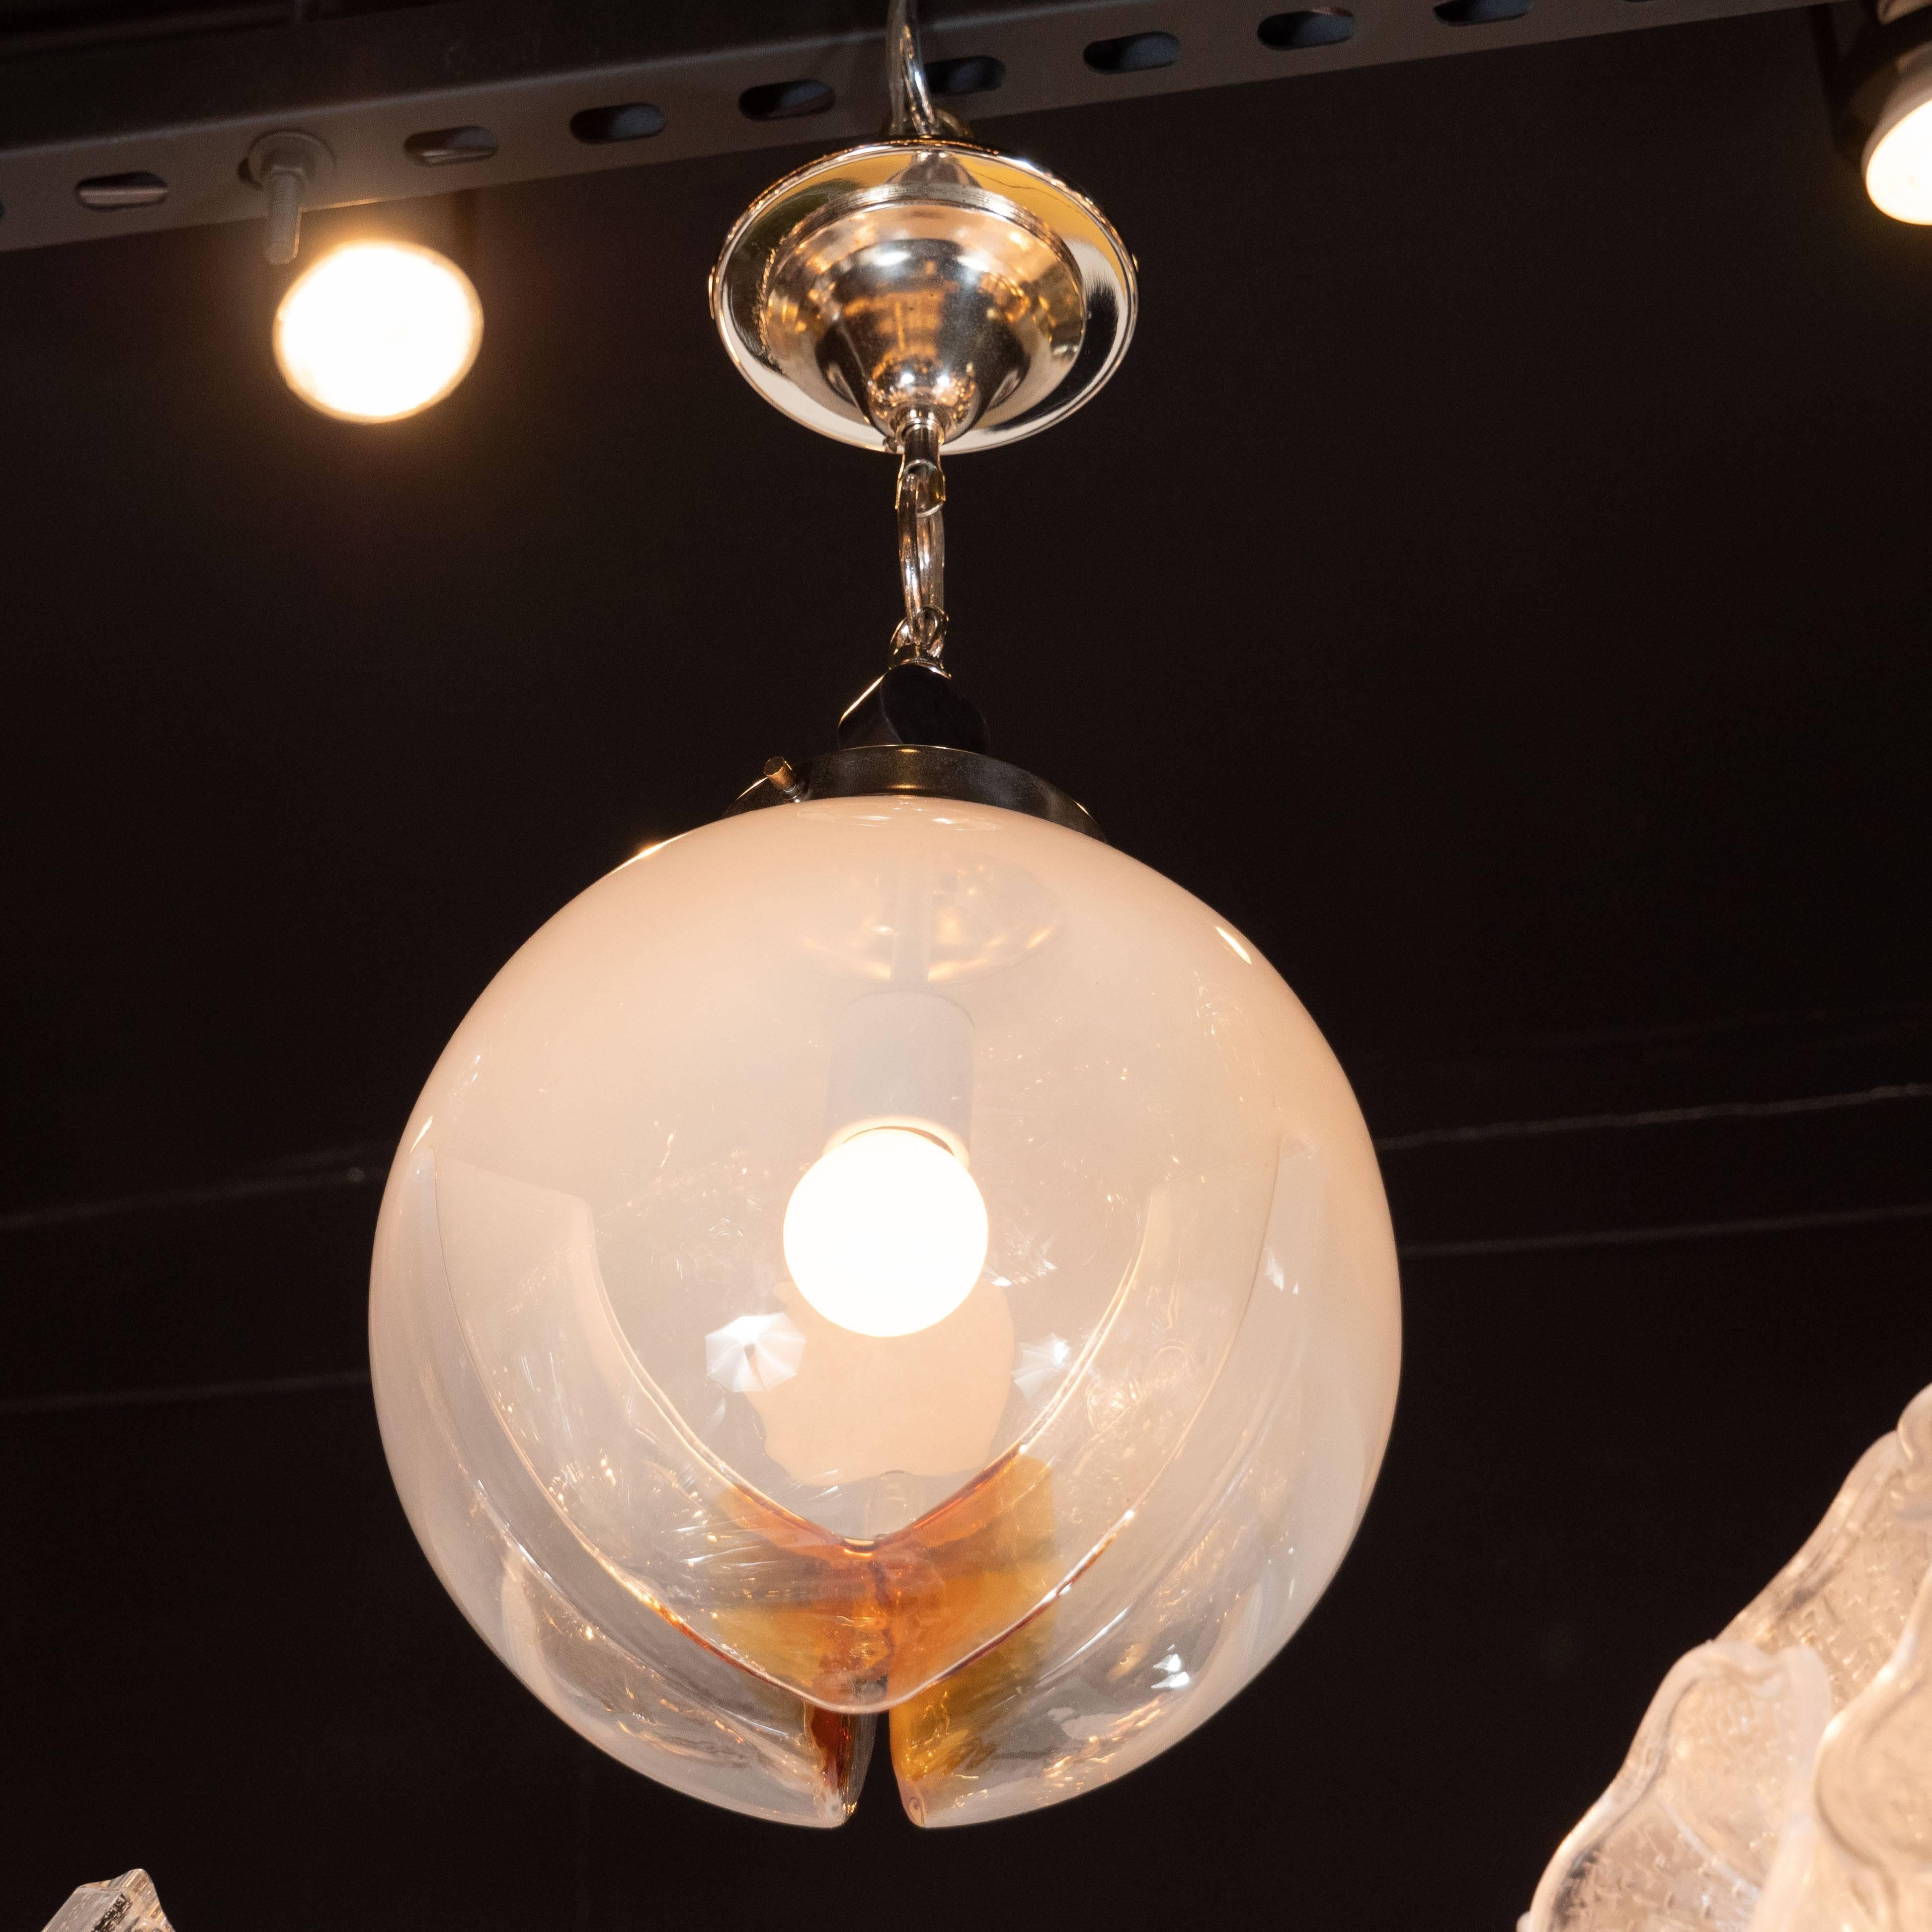 This refined globe pendant was realized by the celebrated maker Mazzega in Italy, circa 1970. It features a globular form in semi opaque glass with amber inflections and channel detailing at the bottom that wraps around three of the sides. Above the